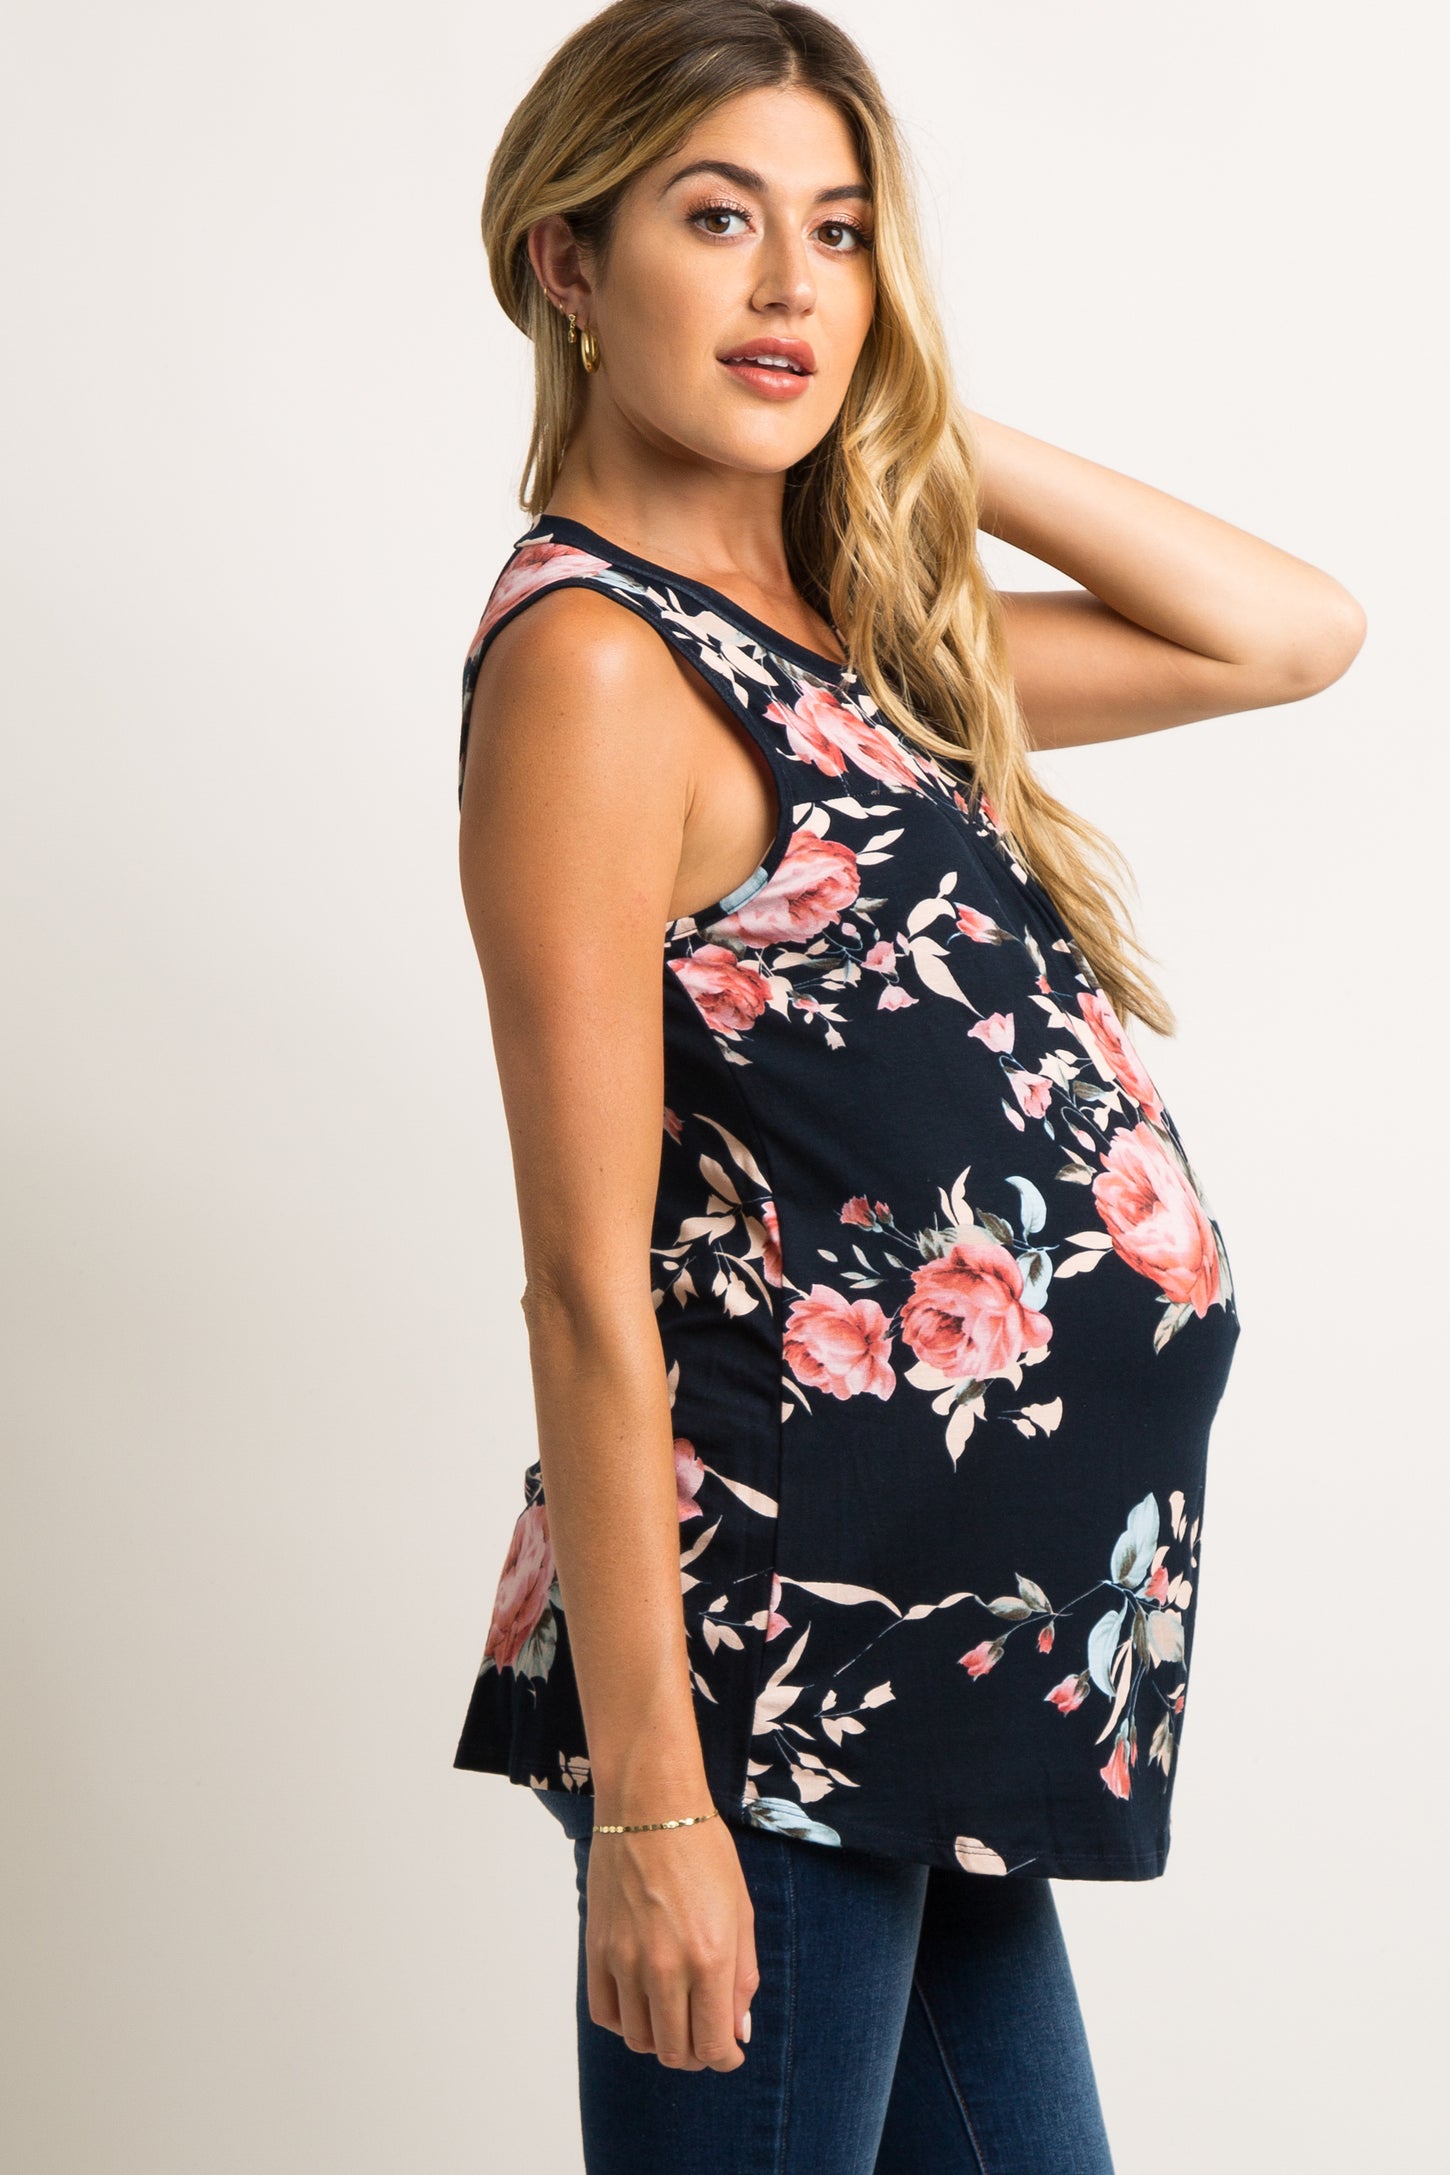 PinkBlush Navy Blue Floral Pleated Front Maternity Tank Top